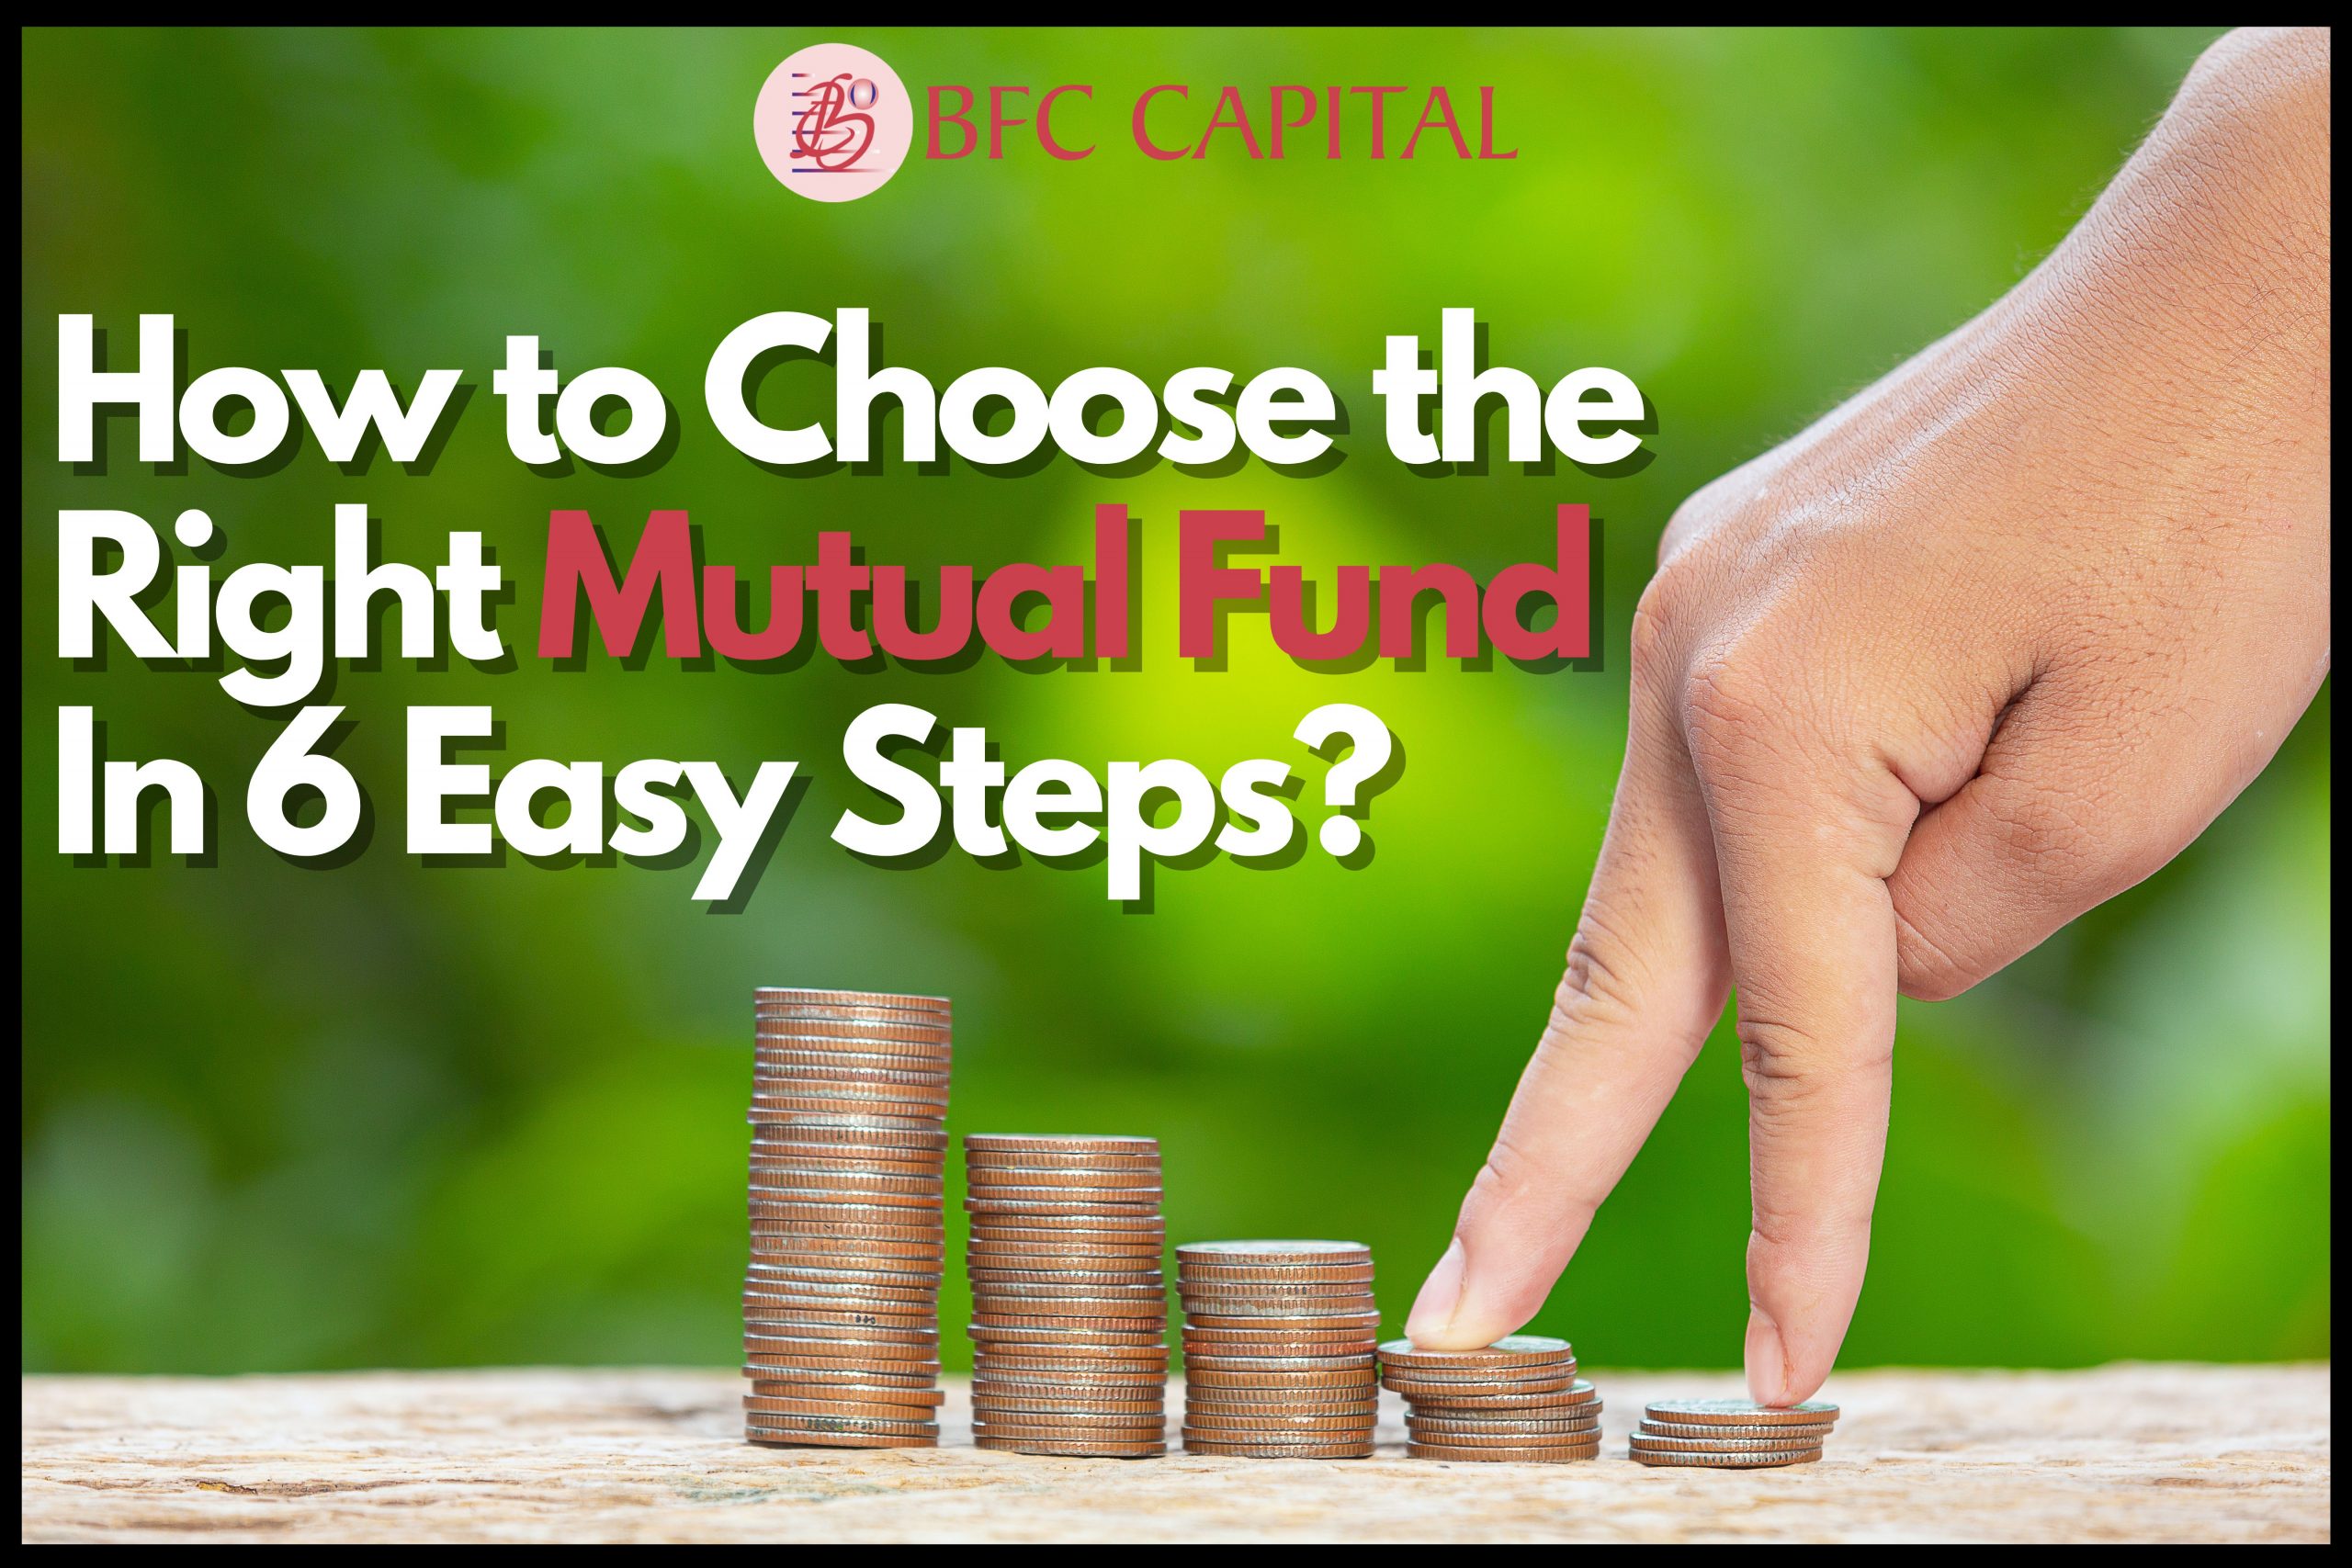 How to Choose the Right Mutual Fund In 6 Easy Steps?